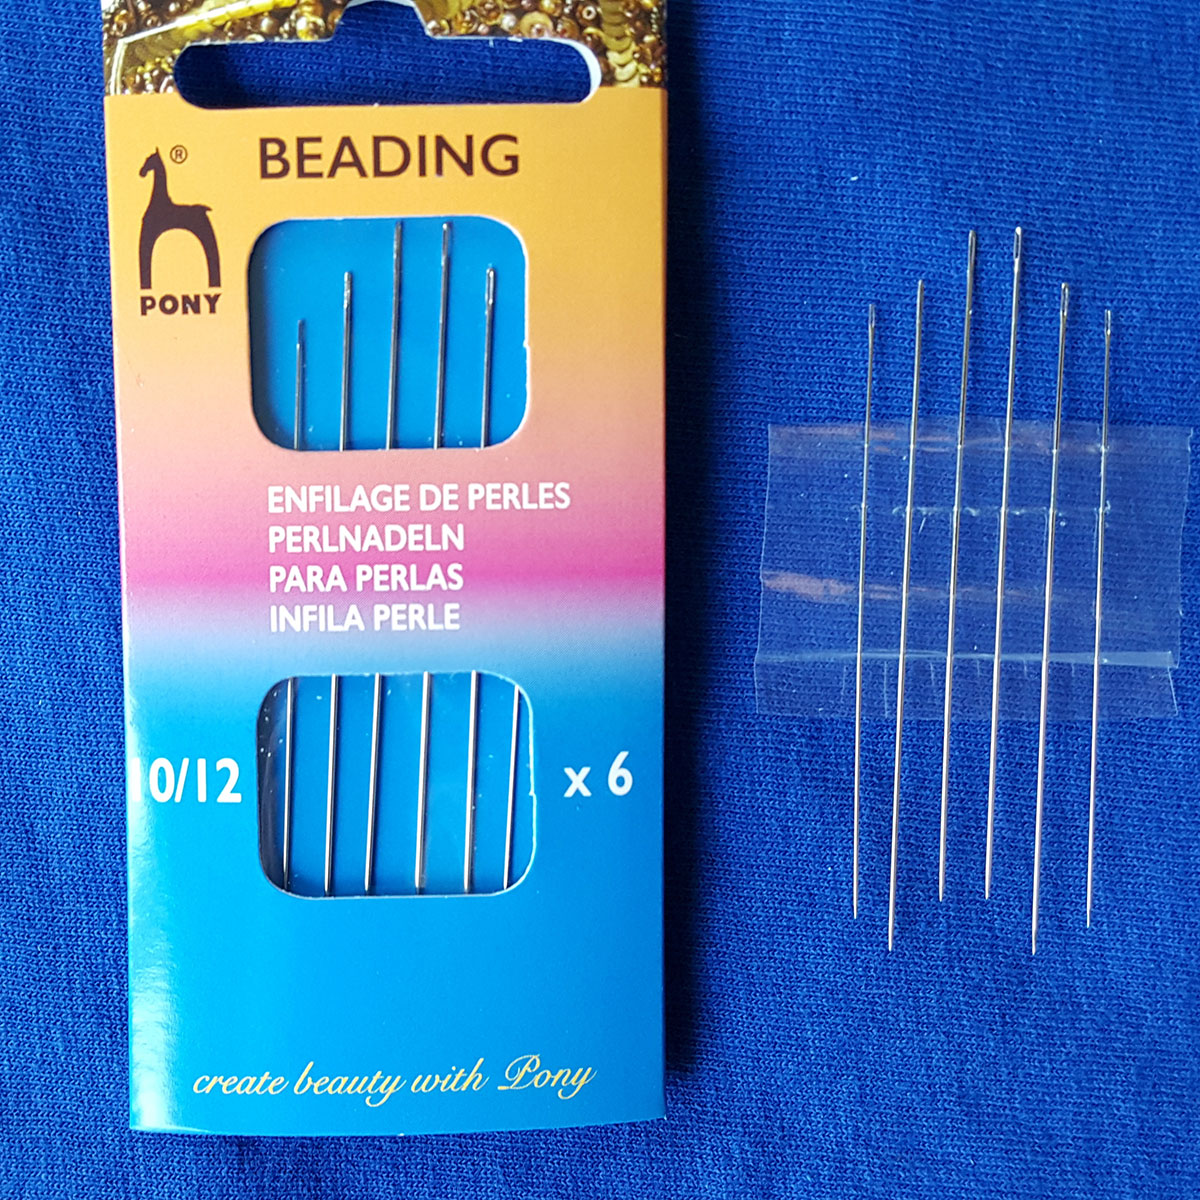 Pony Colour Coded Eye Beading Sewing Needles per pack of 6 P07880-M 